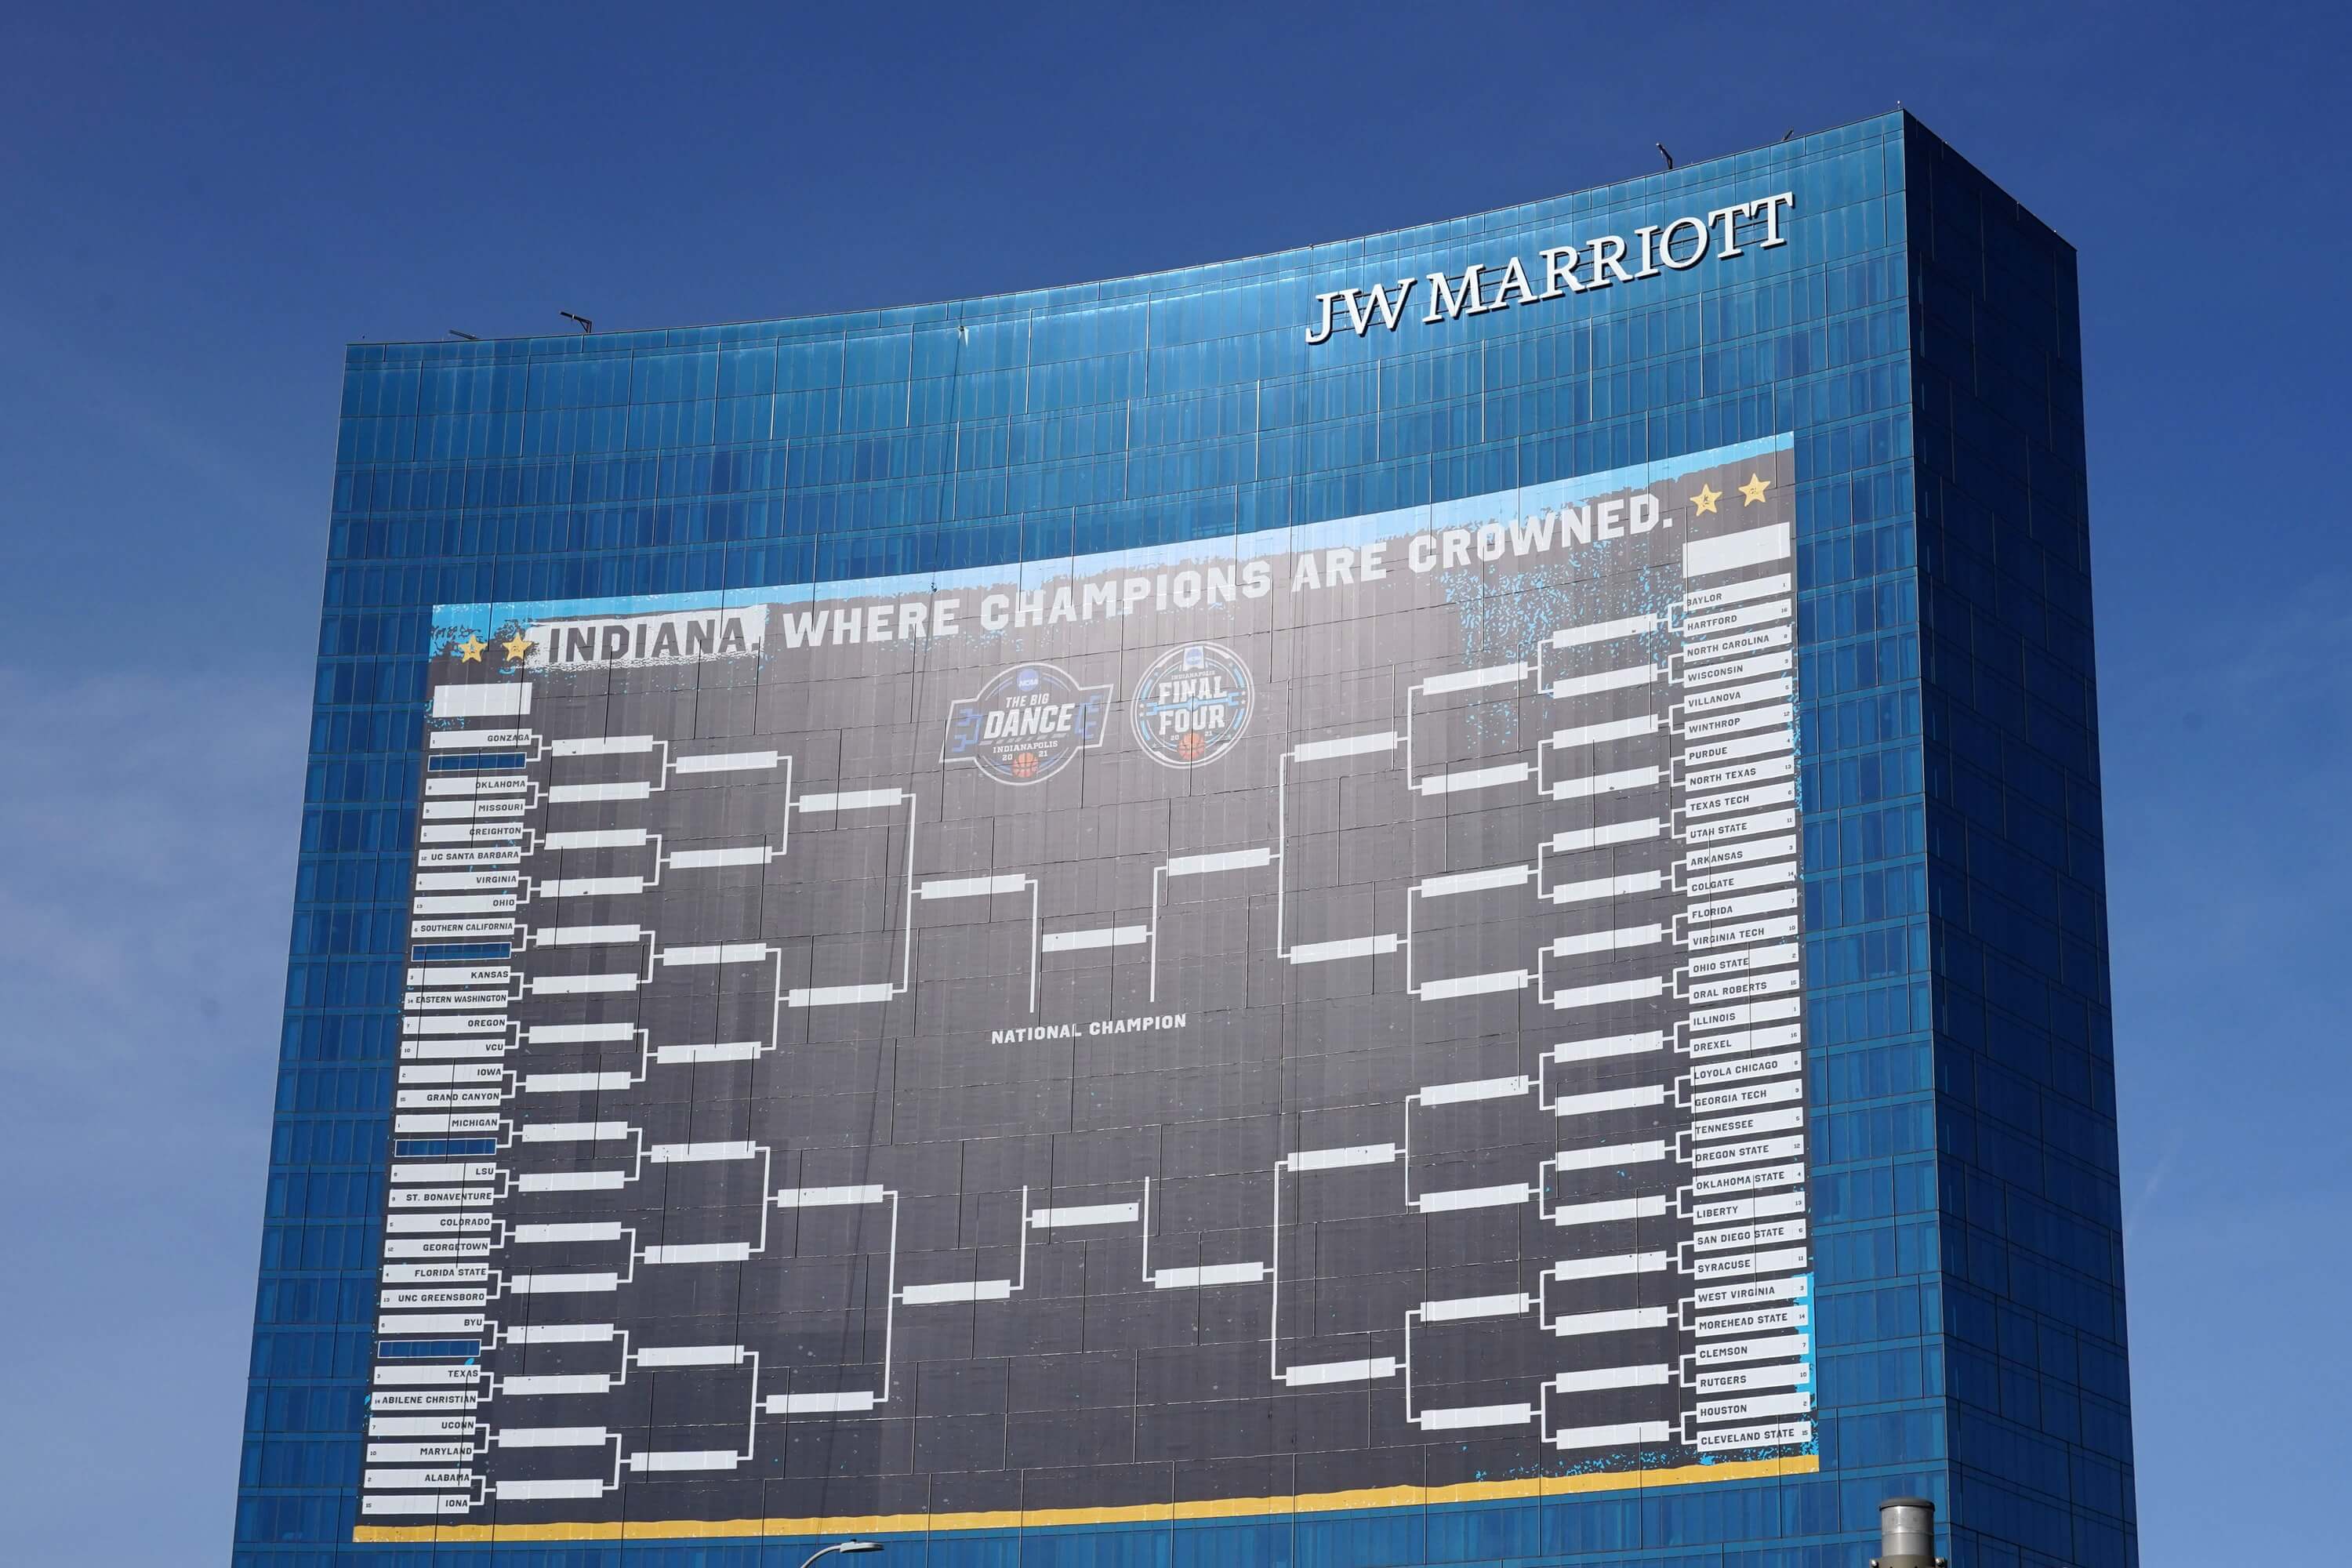 Indianapolis, Indiana, USA; The NCAA Final Four March Madness playoff bracket is displayed on the JW Marriott hotel.